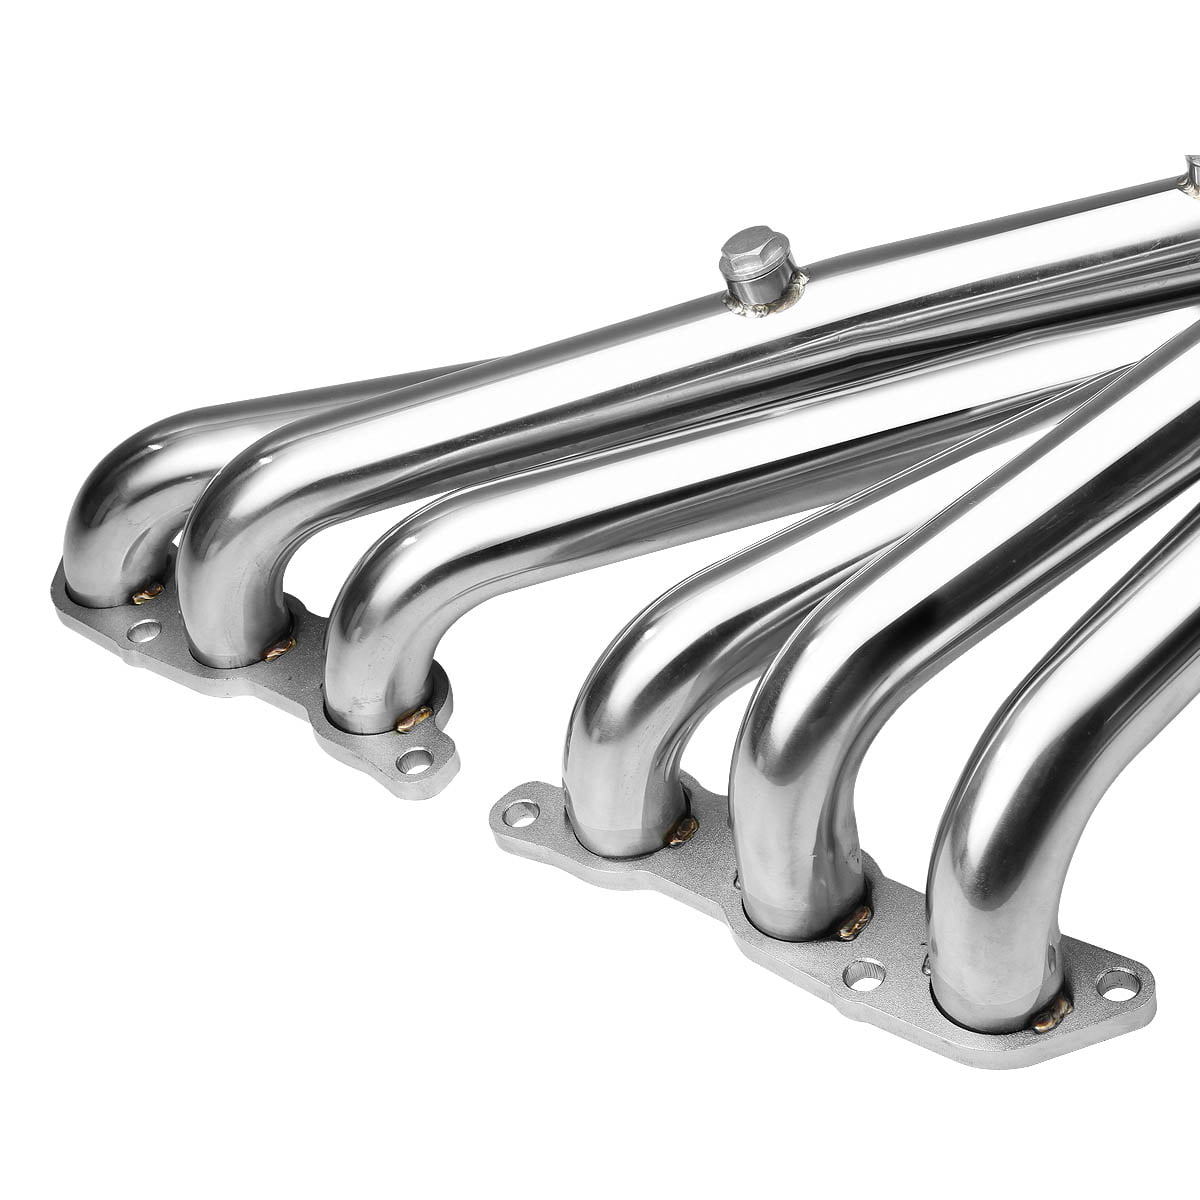 DNA Motoring HDS-IS300 Stainless Steel Exhaust Header Manifold 